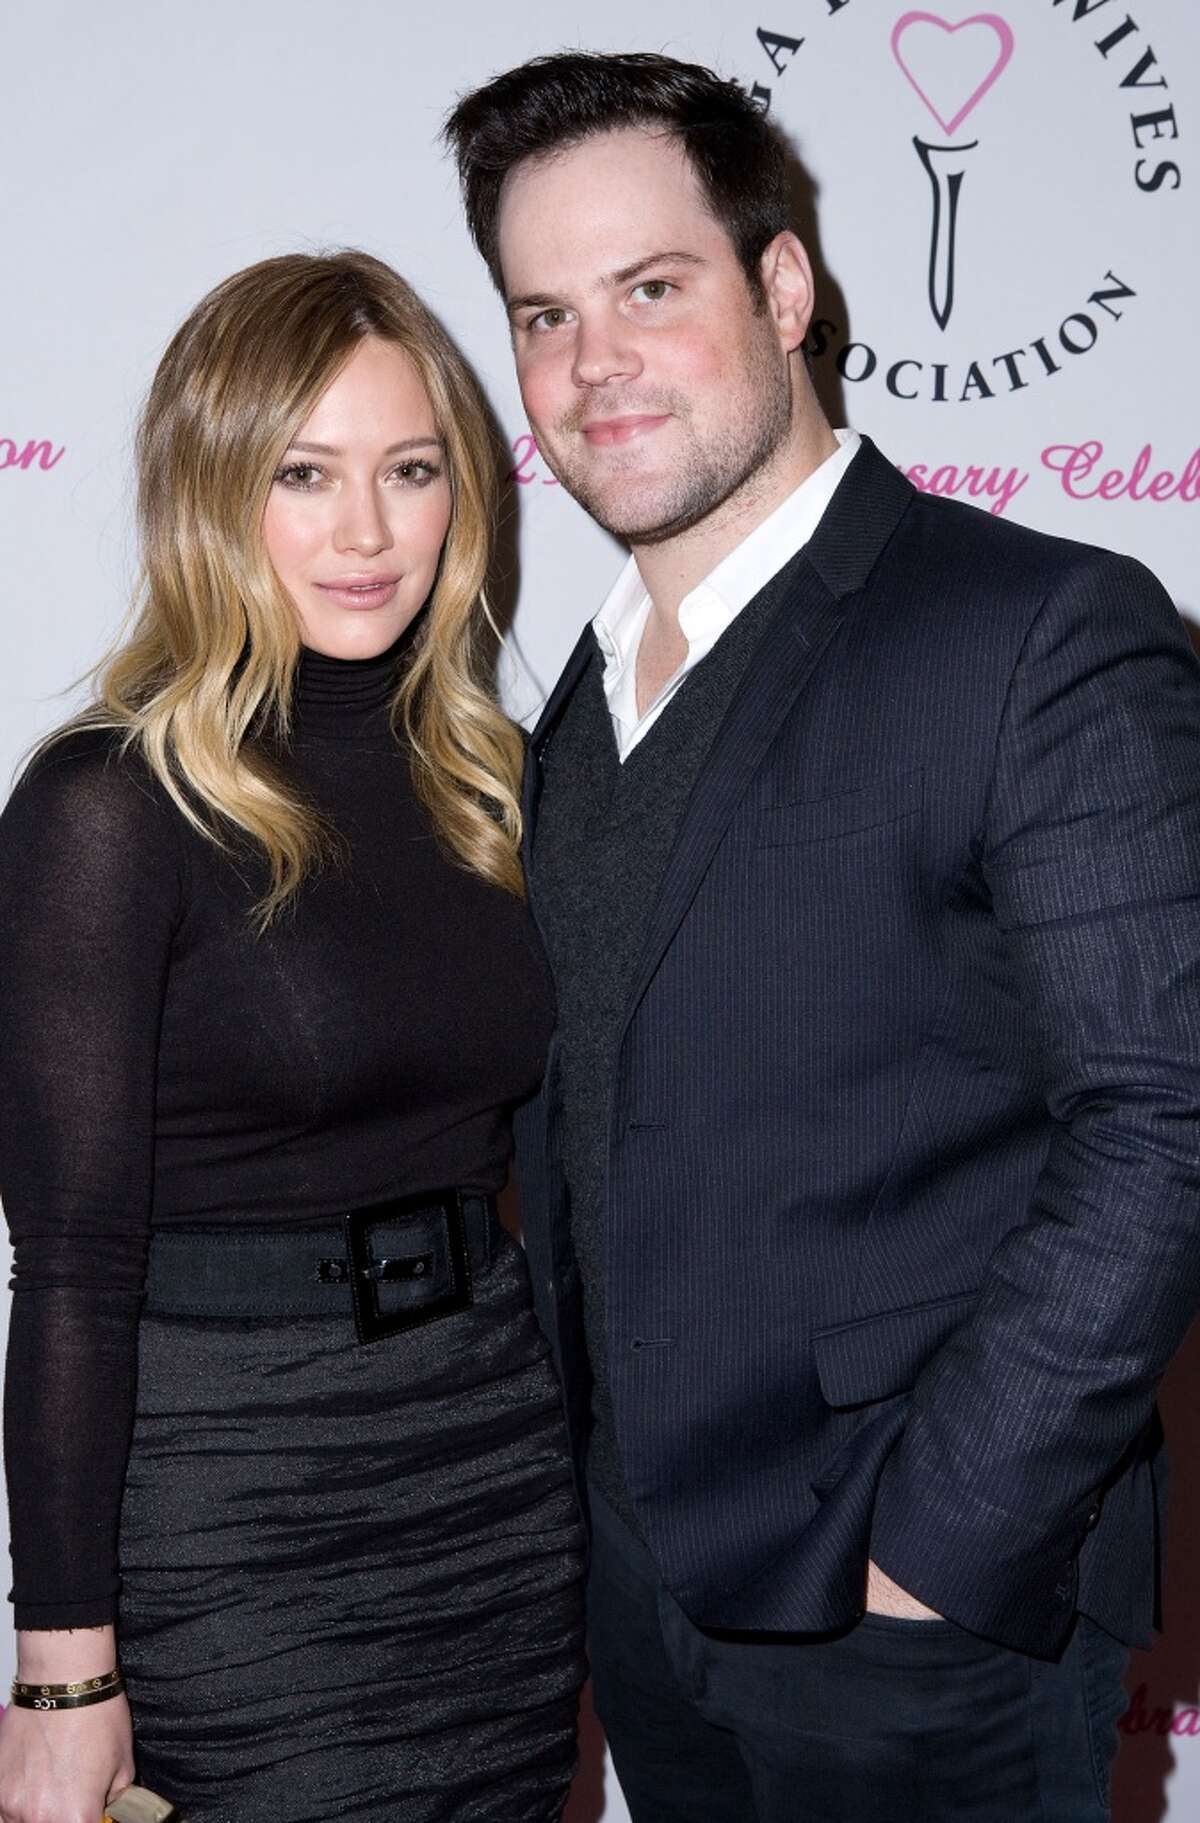 Infamous scandals that brought down celebs Hillary Duff's ex-husband Mike Comrie is being accused of raping a woman in Los Angeles over the weekend, reports say. He is said to have submitted DNA into the LAPD as a part of the rape probe. Continue clicking to look back on the infamous scandals that brought down other celebrities.